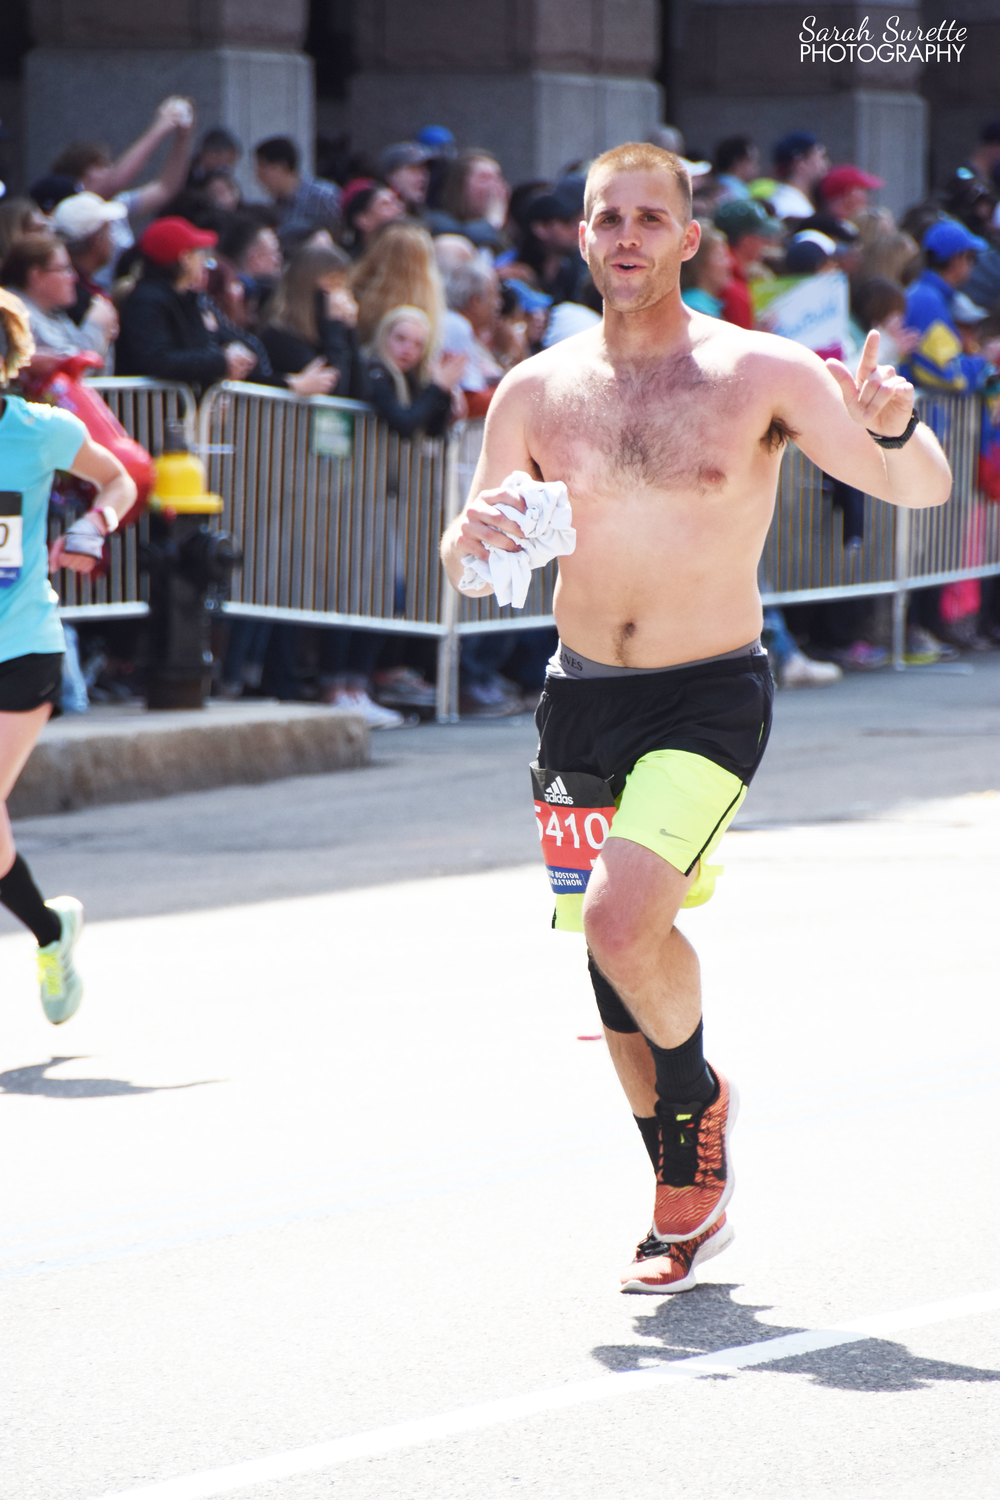 Allan running down Boylston on his way to the finish line!